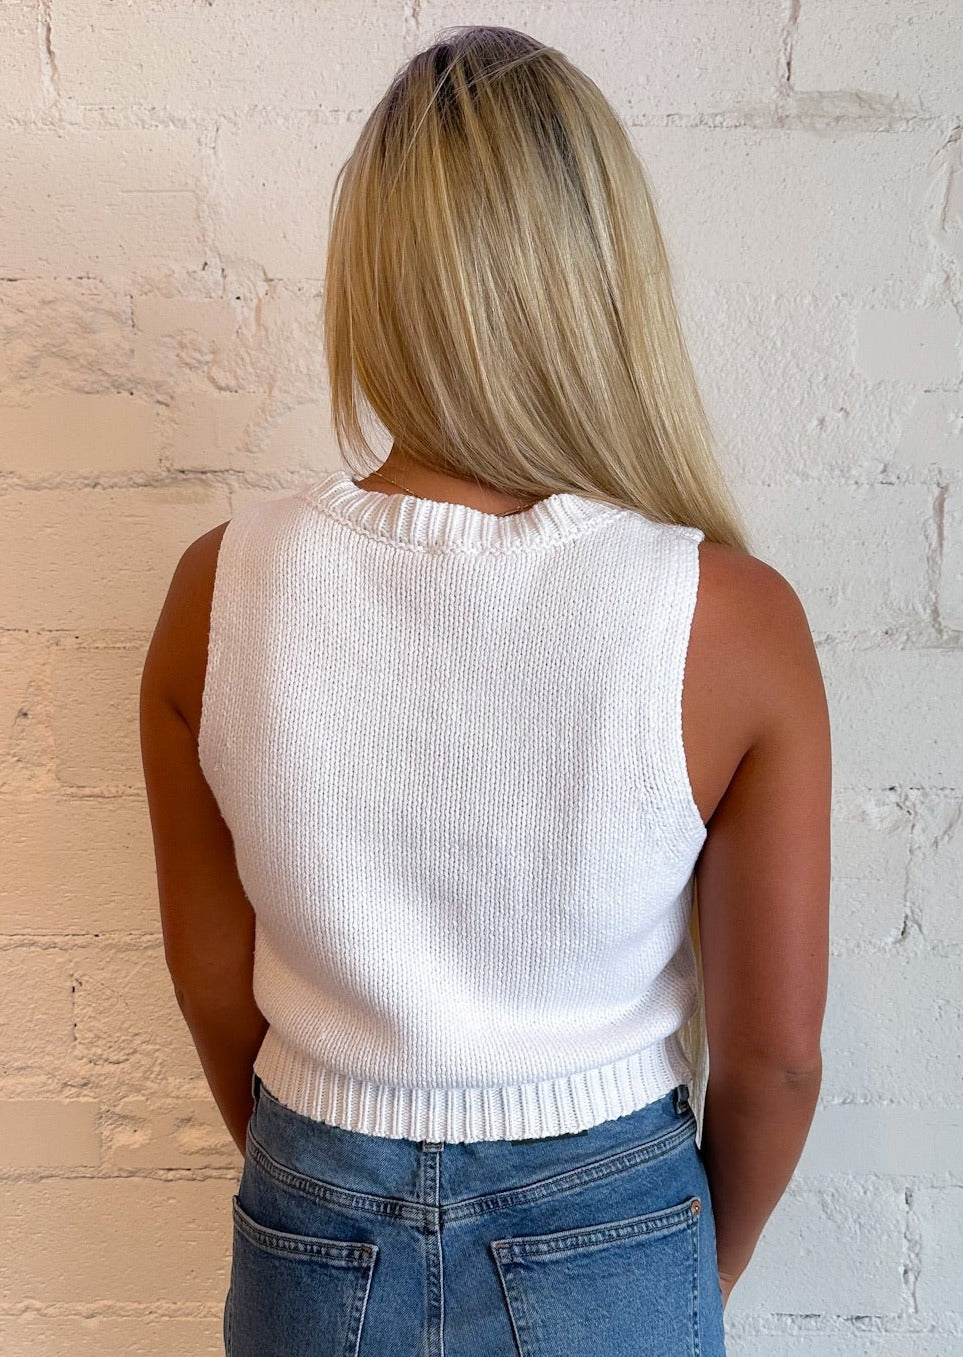 USA Knit Tank Top, Tops, Adeline, Adeline, dallas boutique, dallas texas, texas boutique, women's boutique dallas, adeline boutique, dallas boutique, trendy boutique, affordable boutique